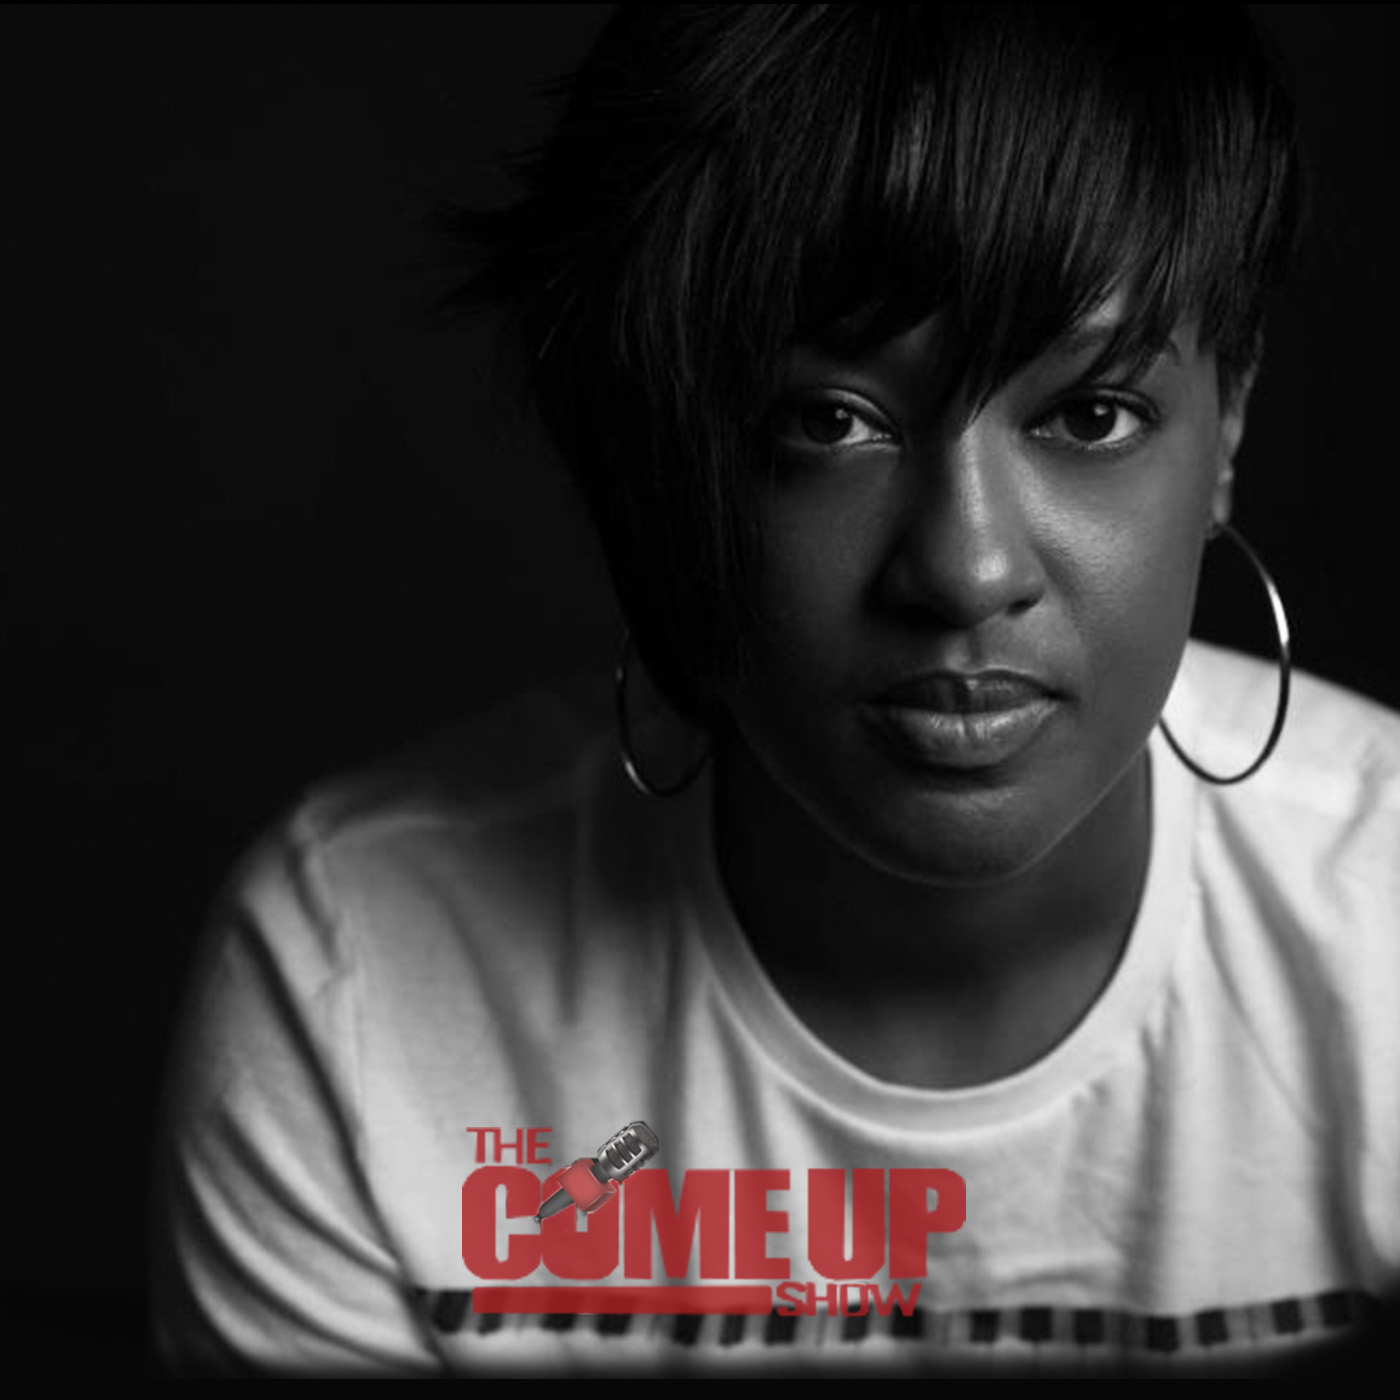 Thumbnail for "Rapsody talks meeting Jay Z, self-belief, and choosing to "give a damn"".